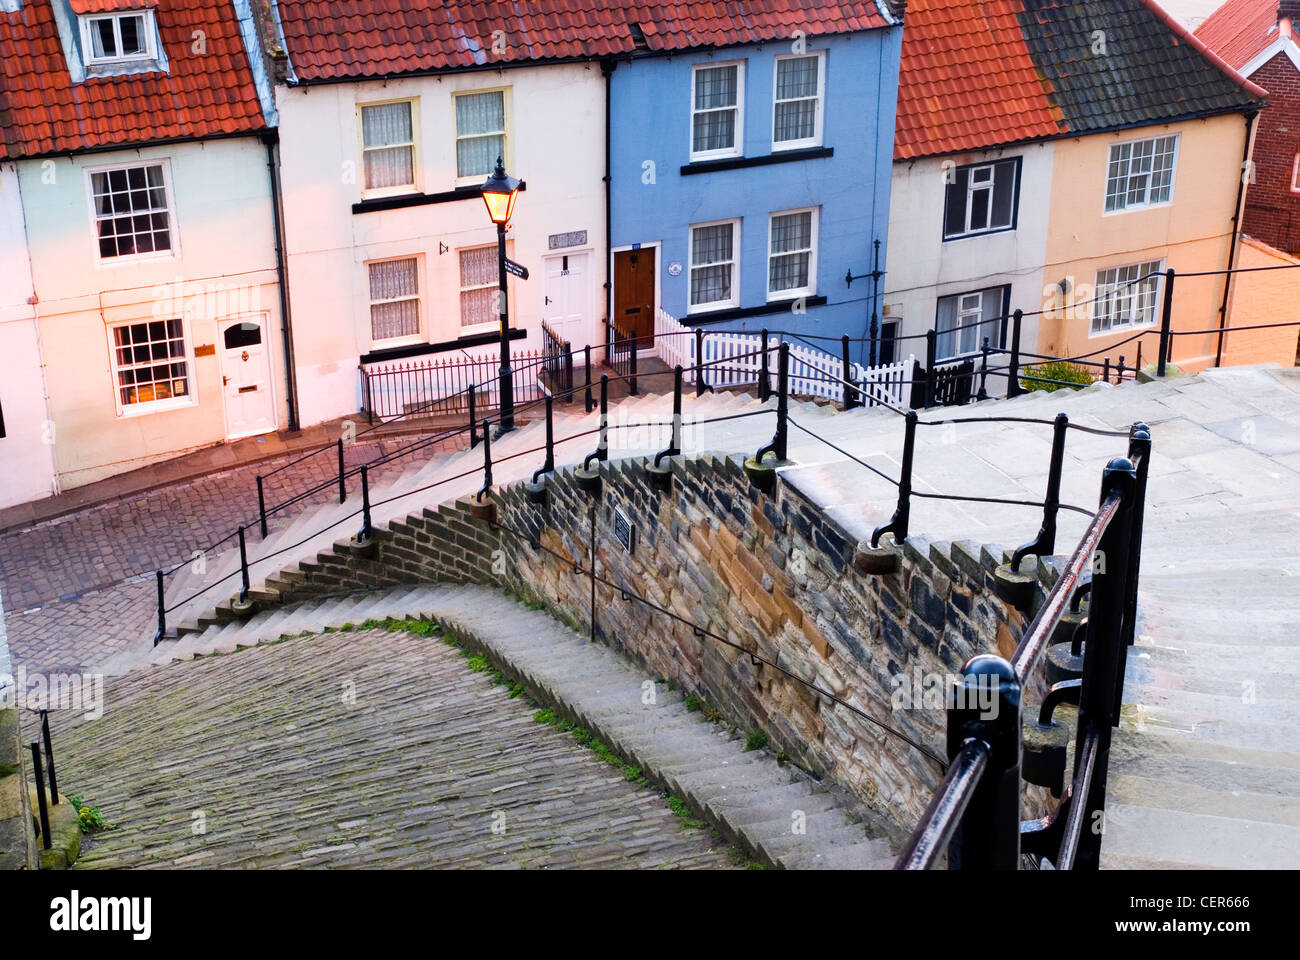 The famous 199 steps leading down towards the old town of Whitby. Stock Photo